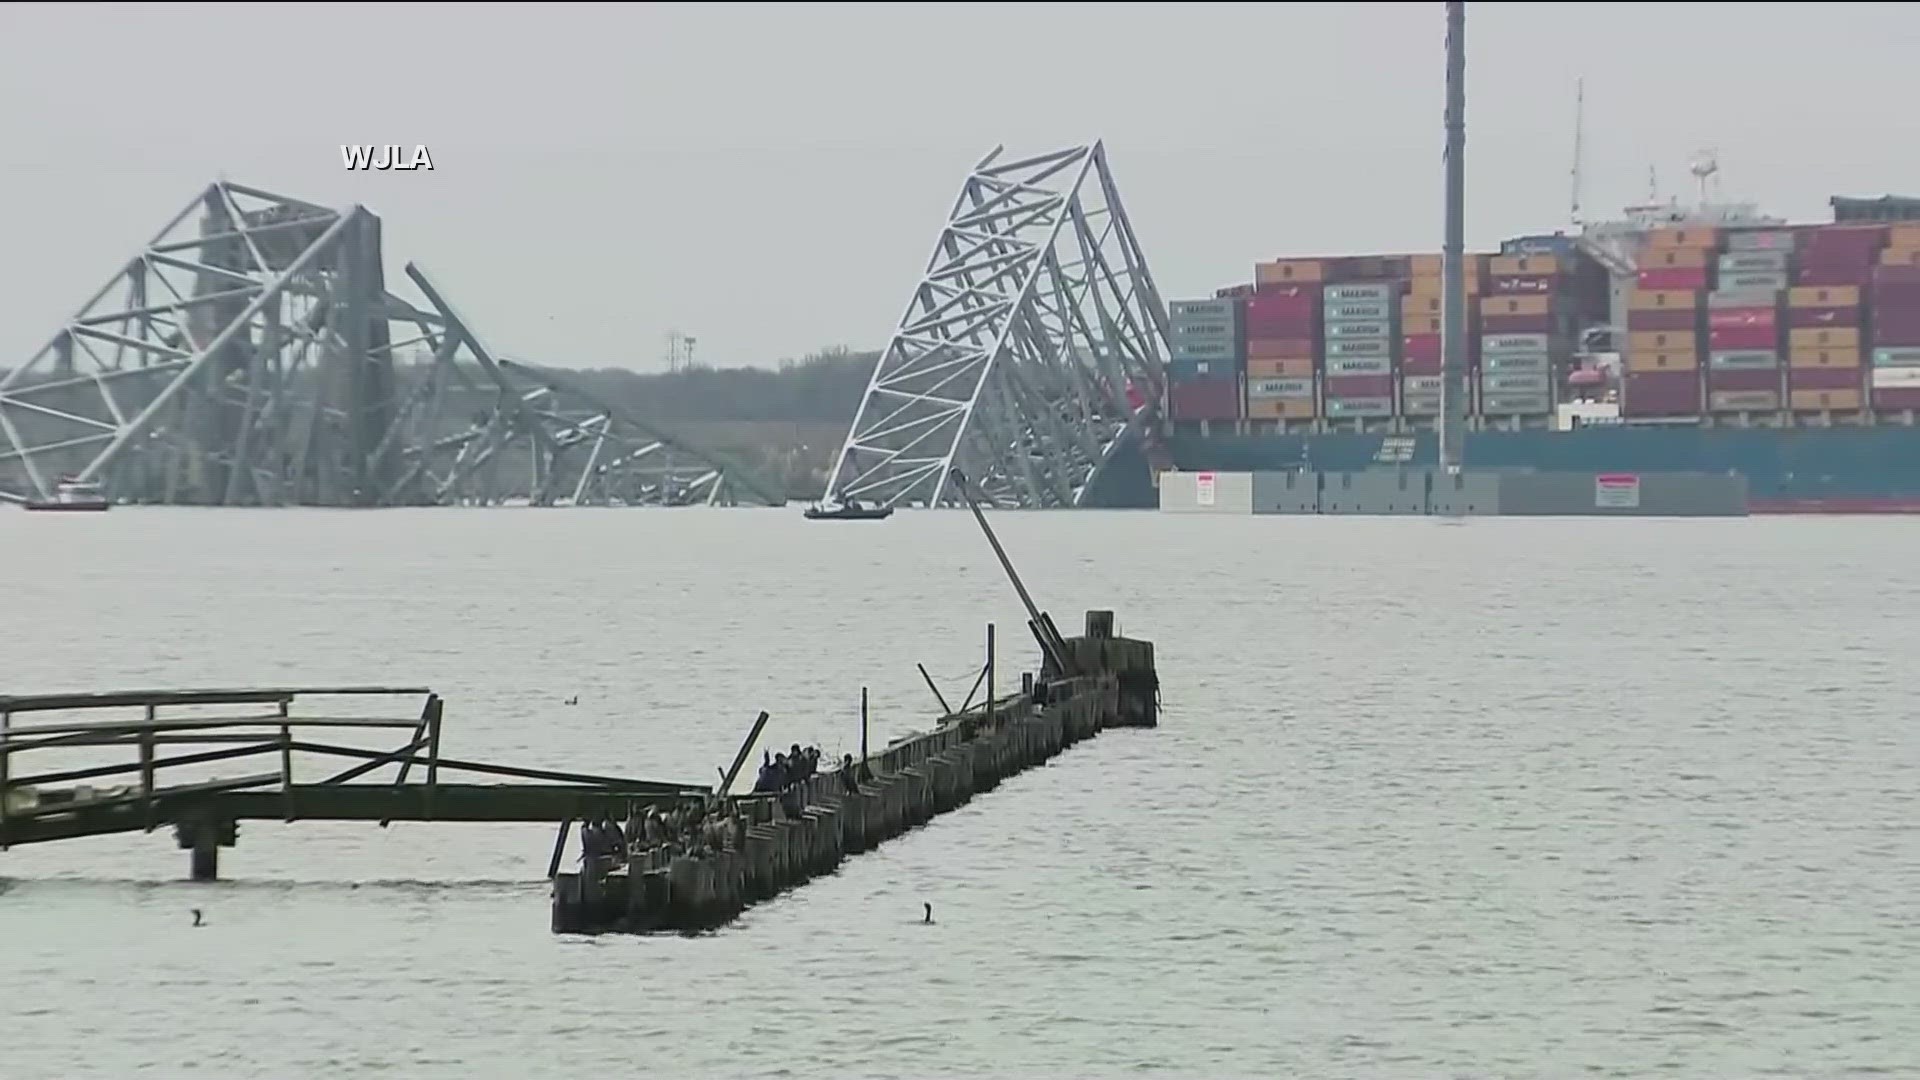 Early Tuesday morning, a cargo ship struck a support pylon and caused the collapse of Baltimore's iconic Francis Scott Key Bridge.